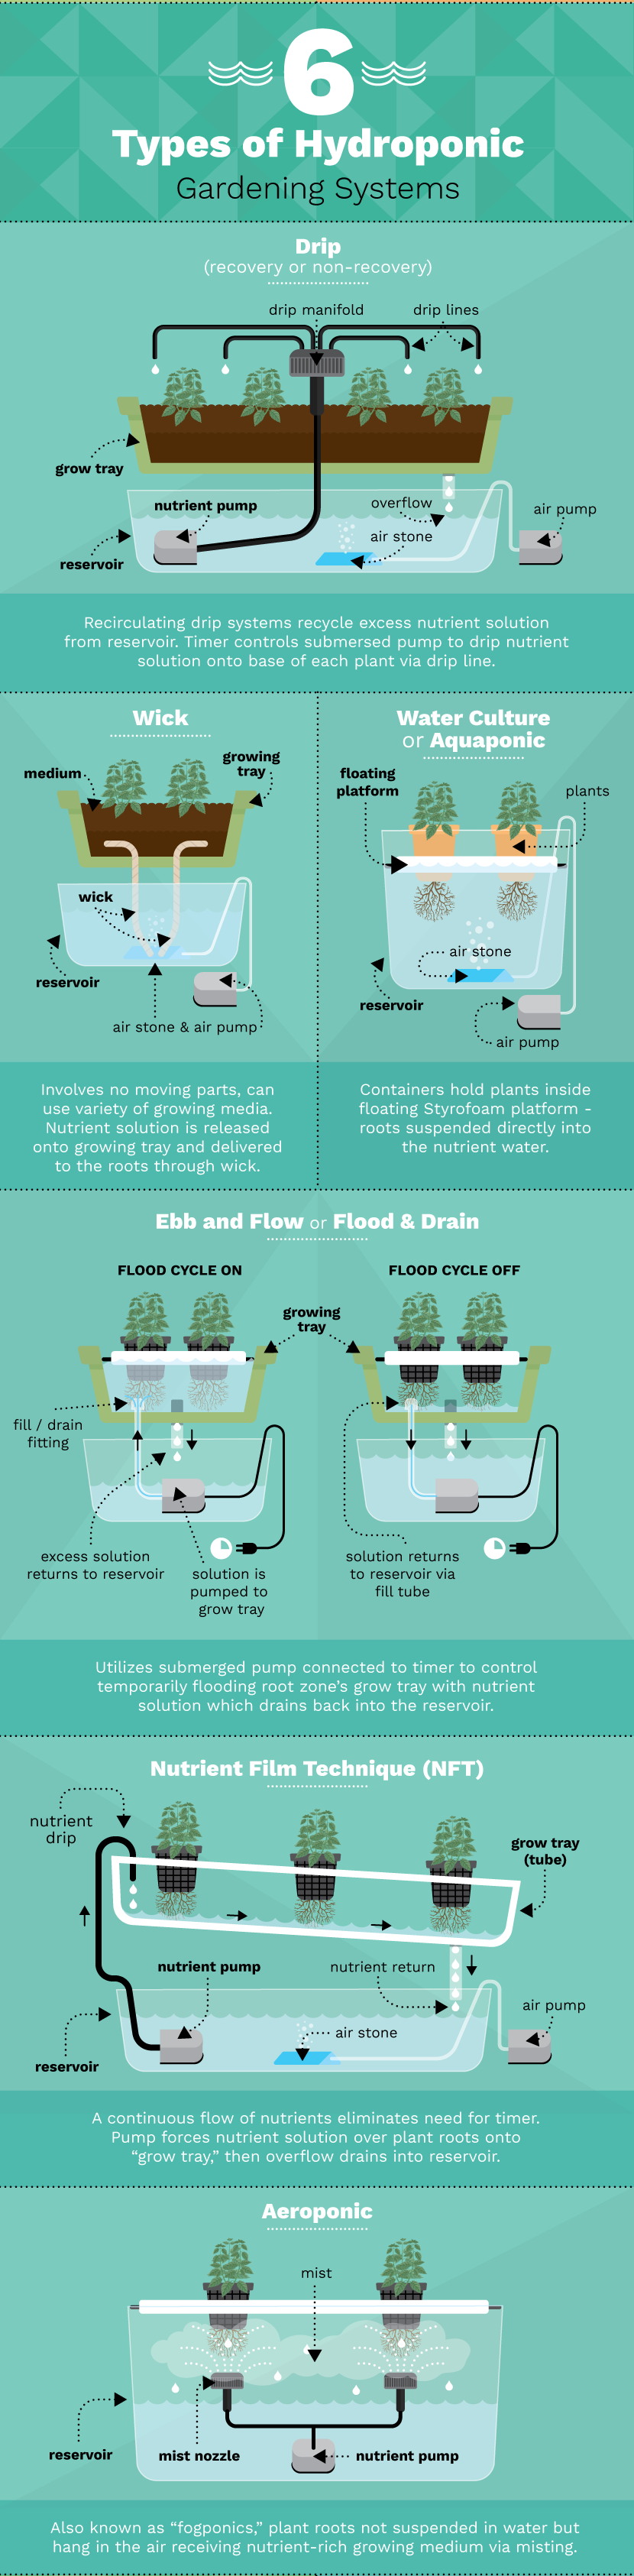 6 Different Hydroponic Gardening Systems For Growing Food...